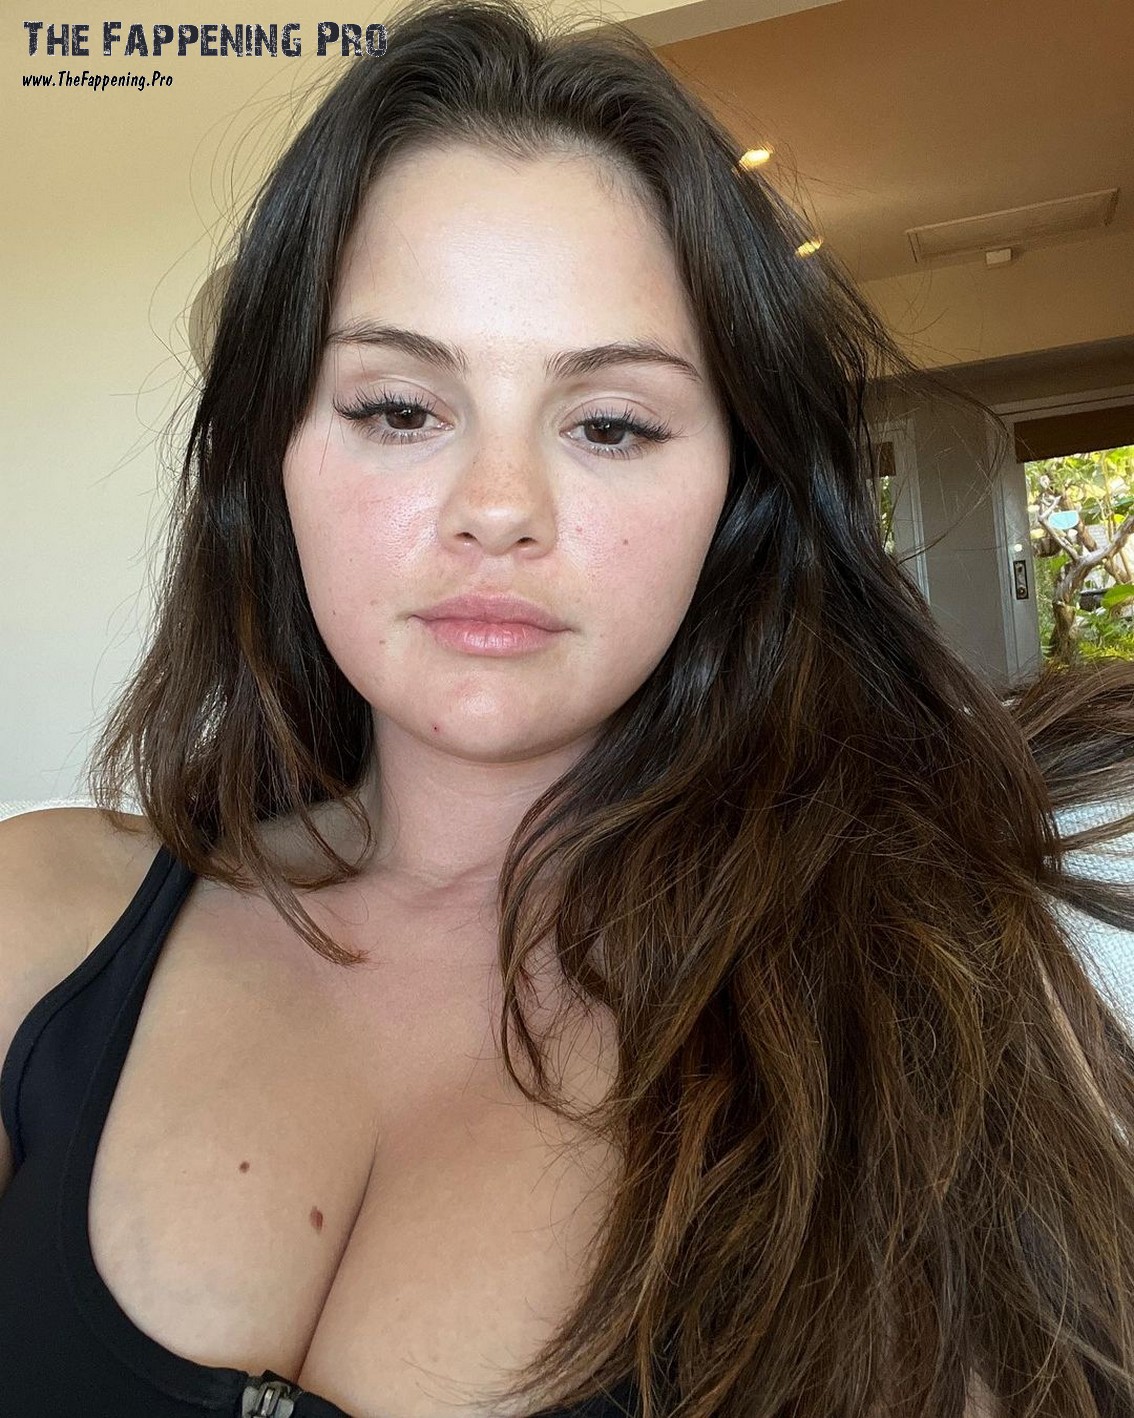 Get ready to be blown away by Selena Gomez's latest selfies! The pop star is flaunting her curves in a see-through white tank top and a revealing bikini, showing off her noticeably larger assets compared to a leaked photo from just a year ago. Fans are buzzing about Selena's transformation and you won't want to miss out on all the juicy details!